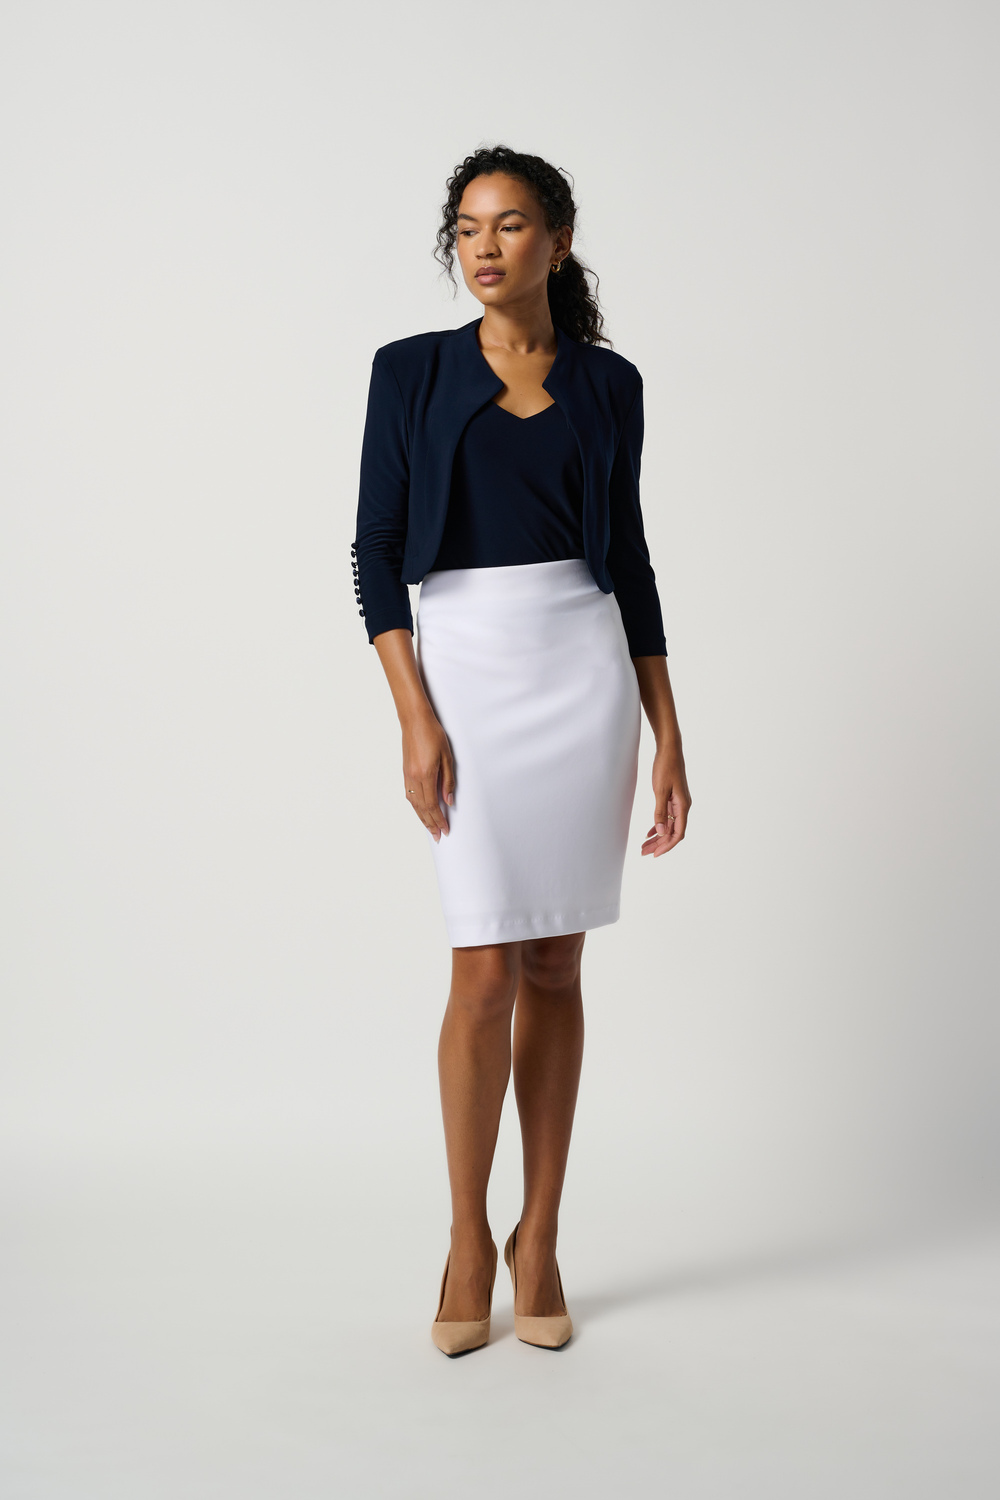 Mid-Rise Pencil Skirt Style 153071. White